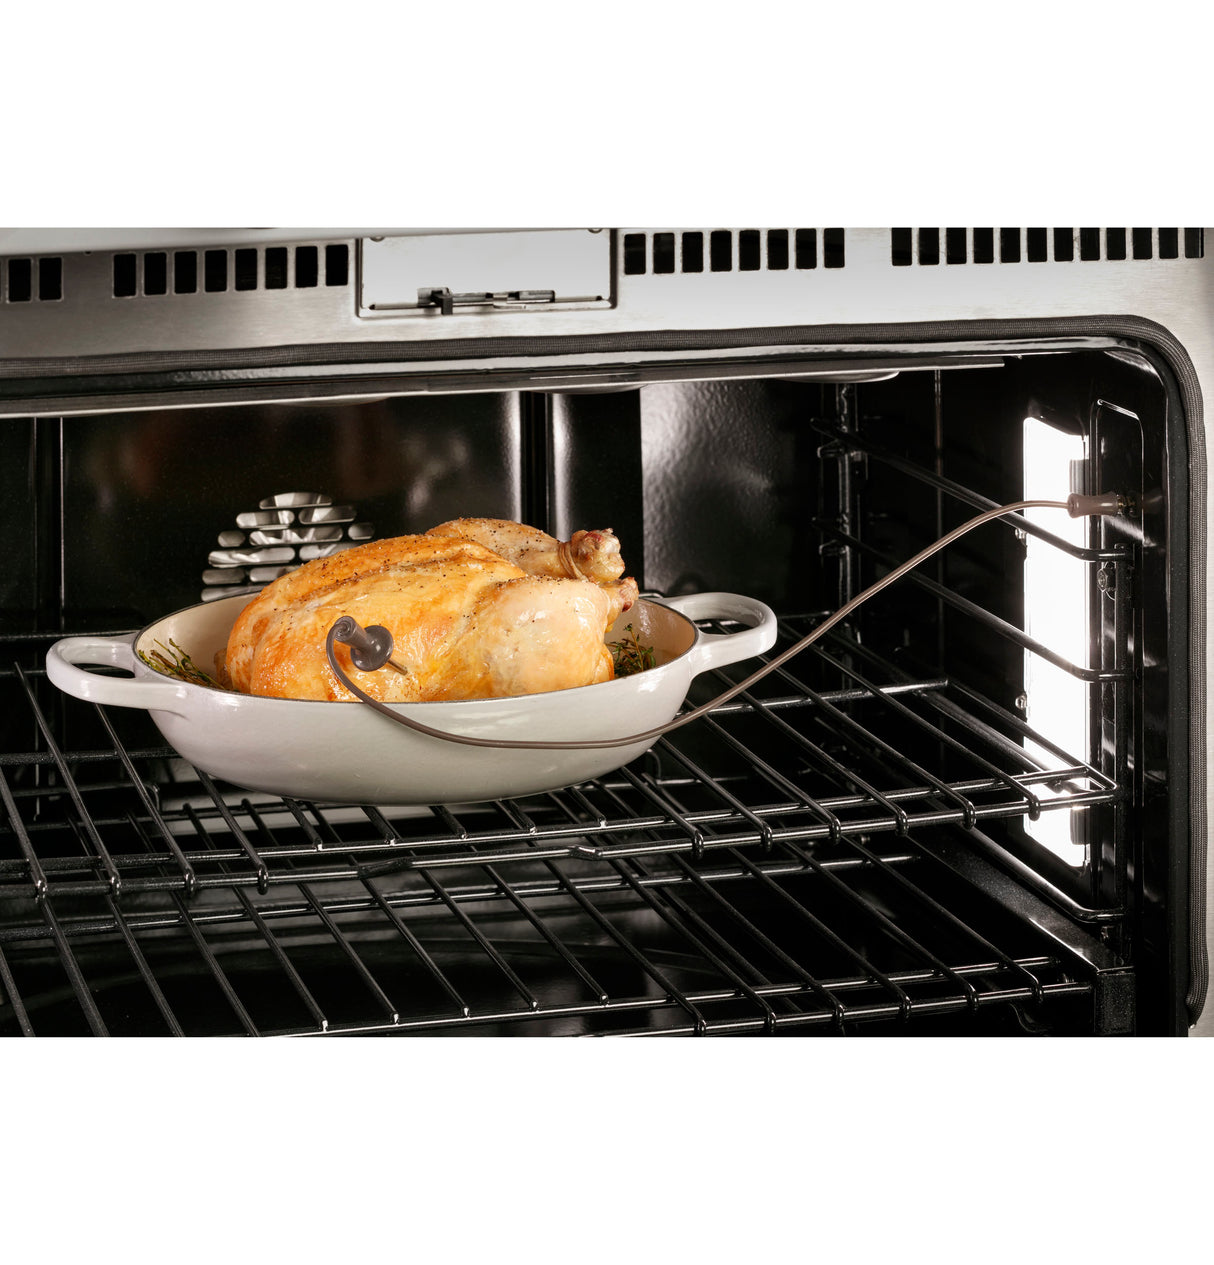 Caf(eback)(TM) 48" Smart Dual-Fuel Commercial-Style Range with 6 Burners and Griddle (Natural Gas) - (C2Y486P3TD1)